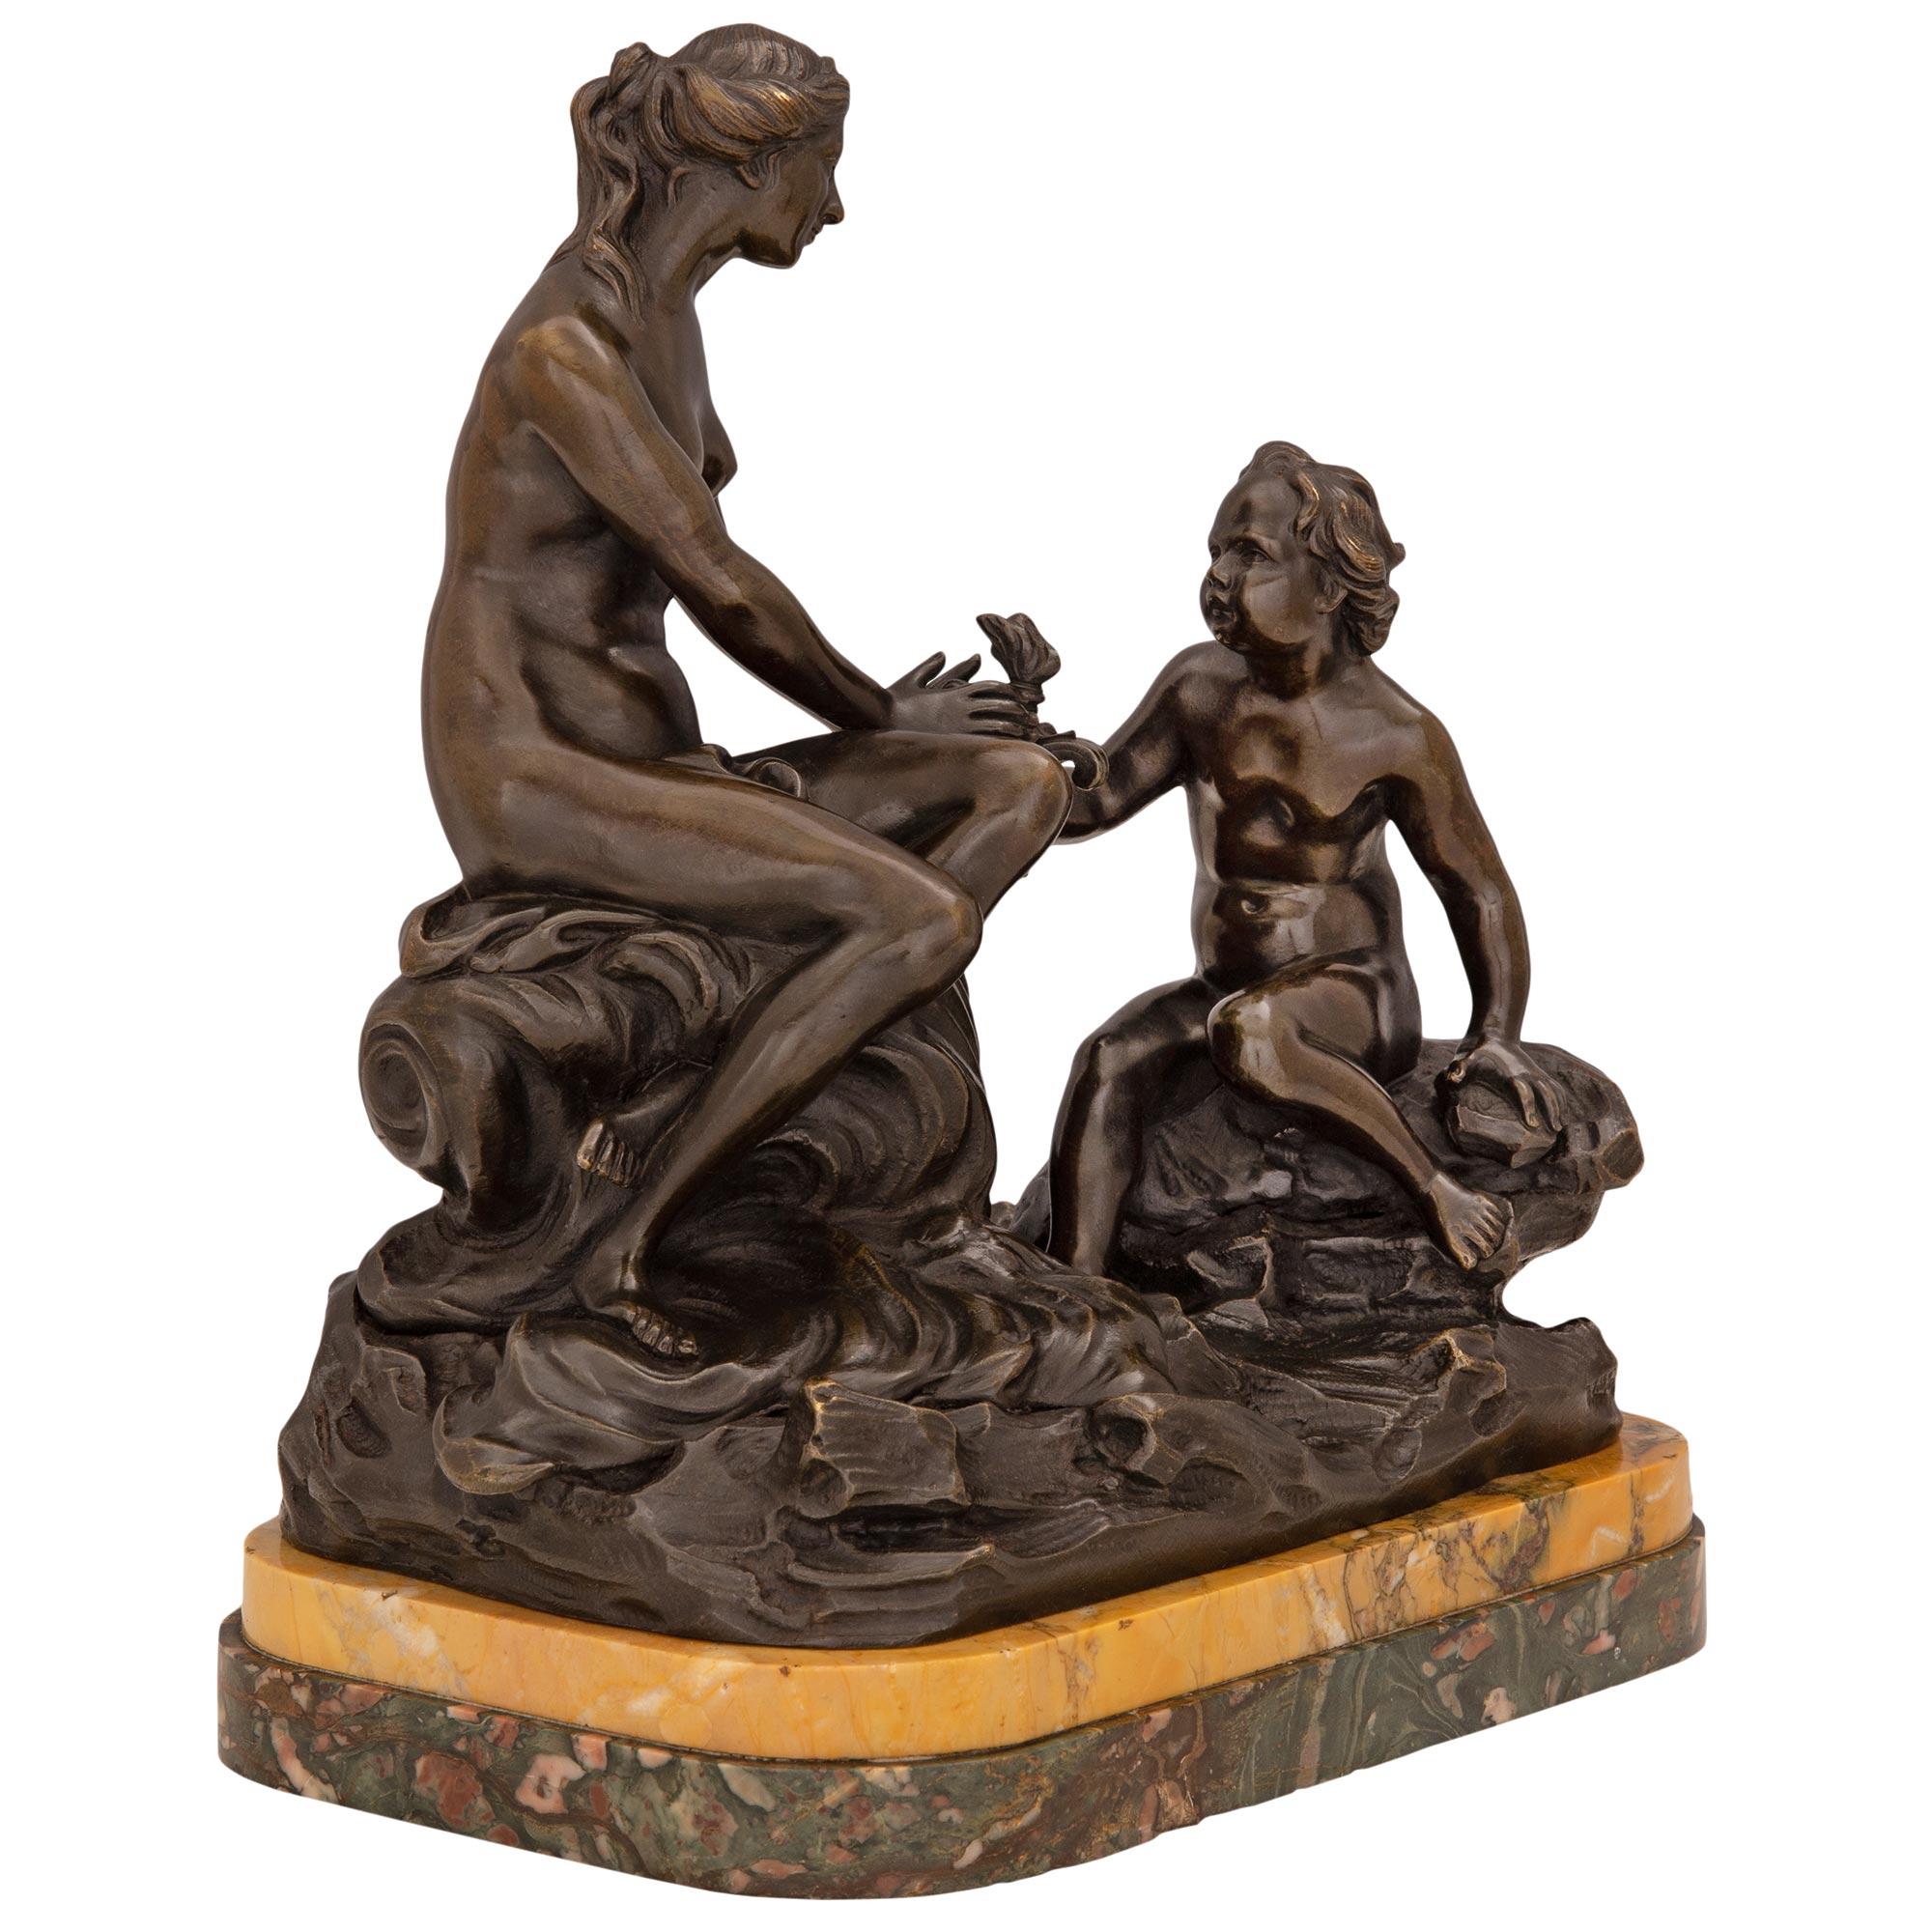 A striking French 19th century patinated bronze, Breccia de Pavonazza and Sienna marble statue. The impressive statue is raised by a beautiful Breccia de Pavonazza and Sienna marble base with a fine stepped design. The richly chased bronze above